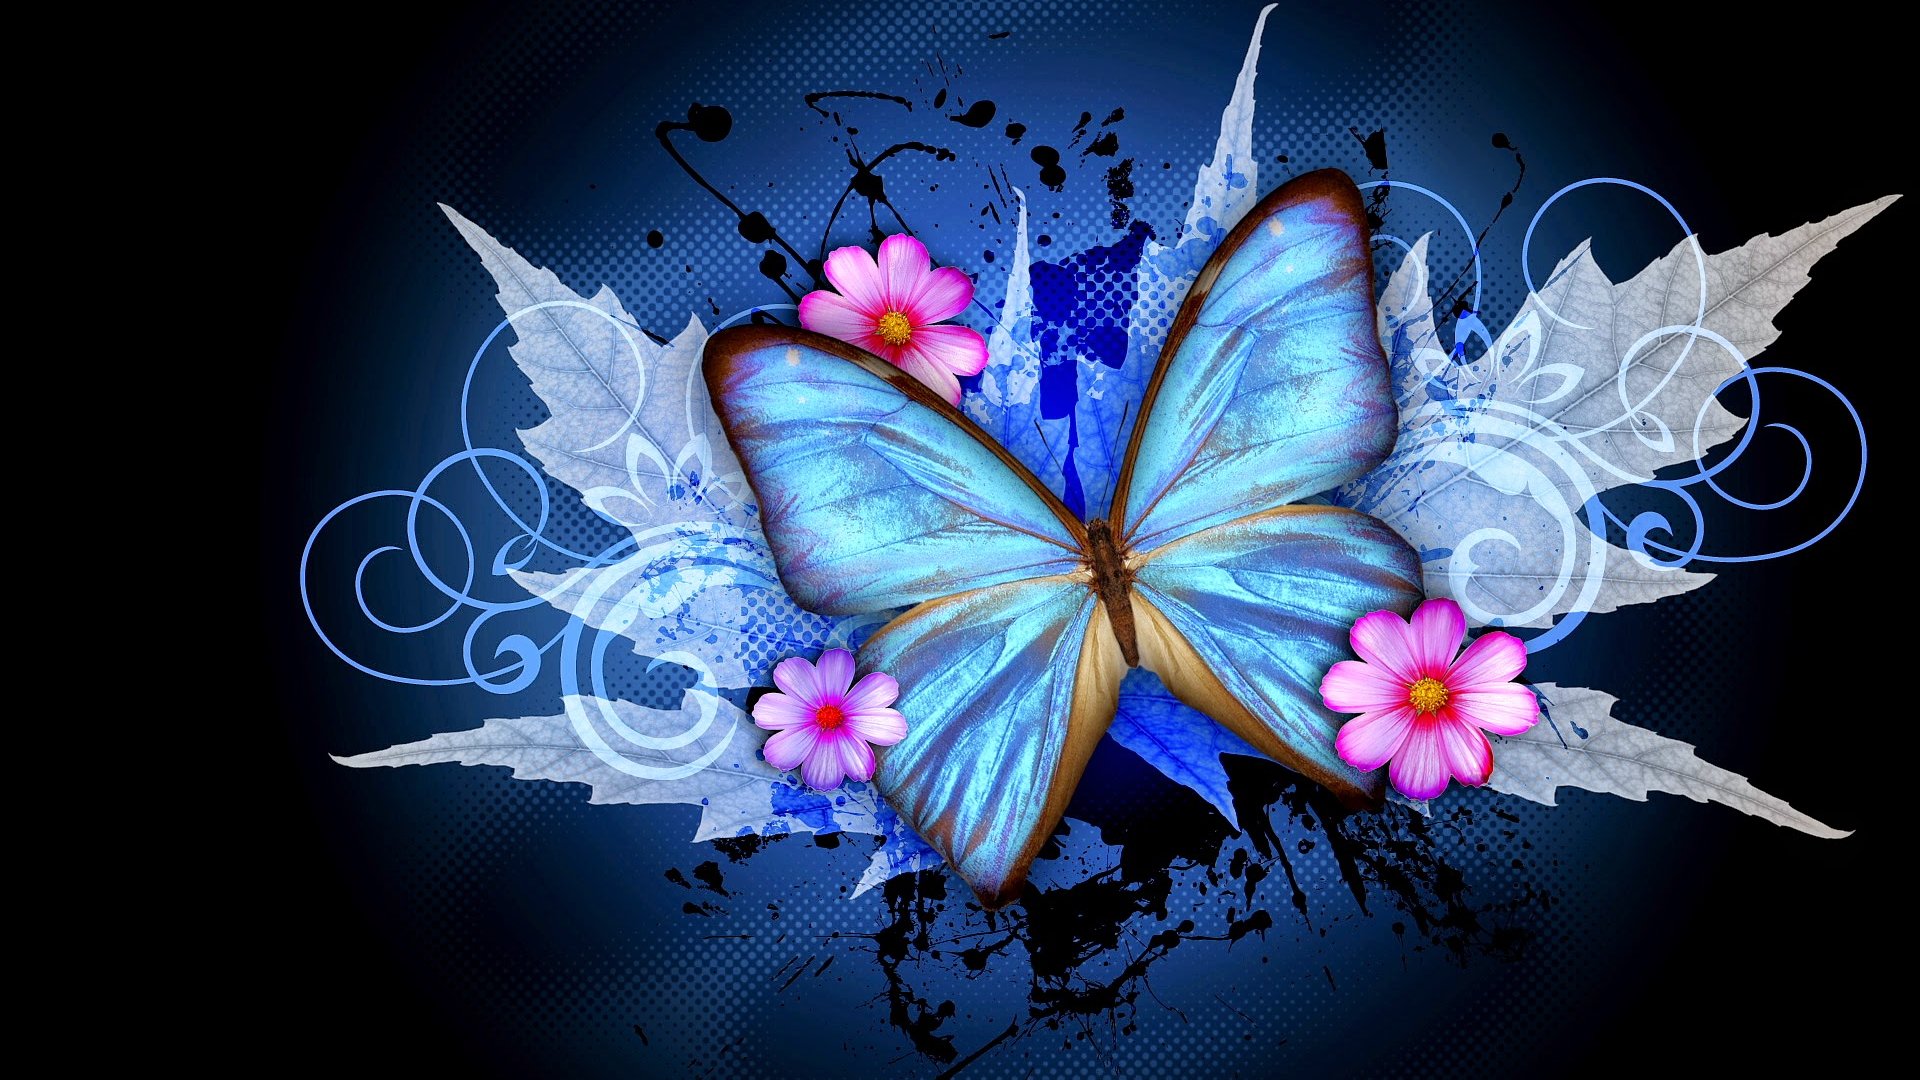 Hd Abstract Wallpaper - Beautiful Butterfly Images For Whatsapp Dp -  1920x1080 Wallpaper 